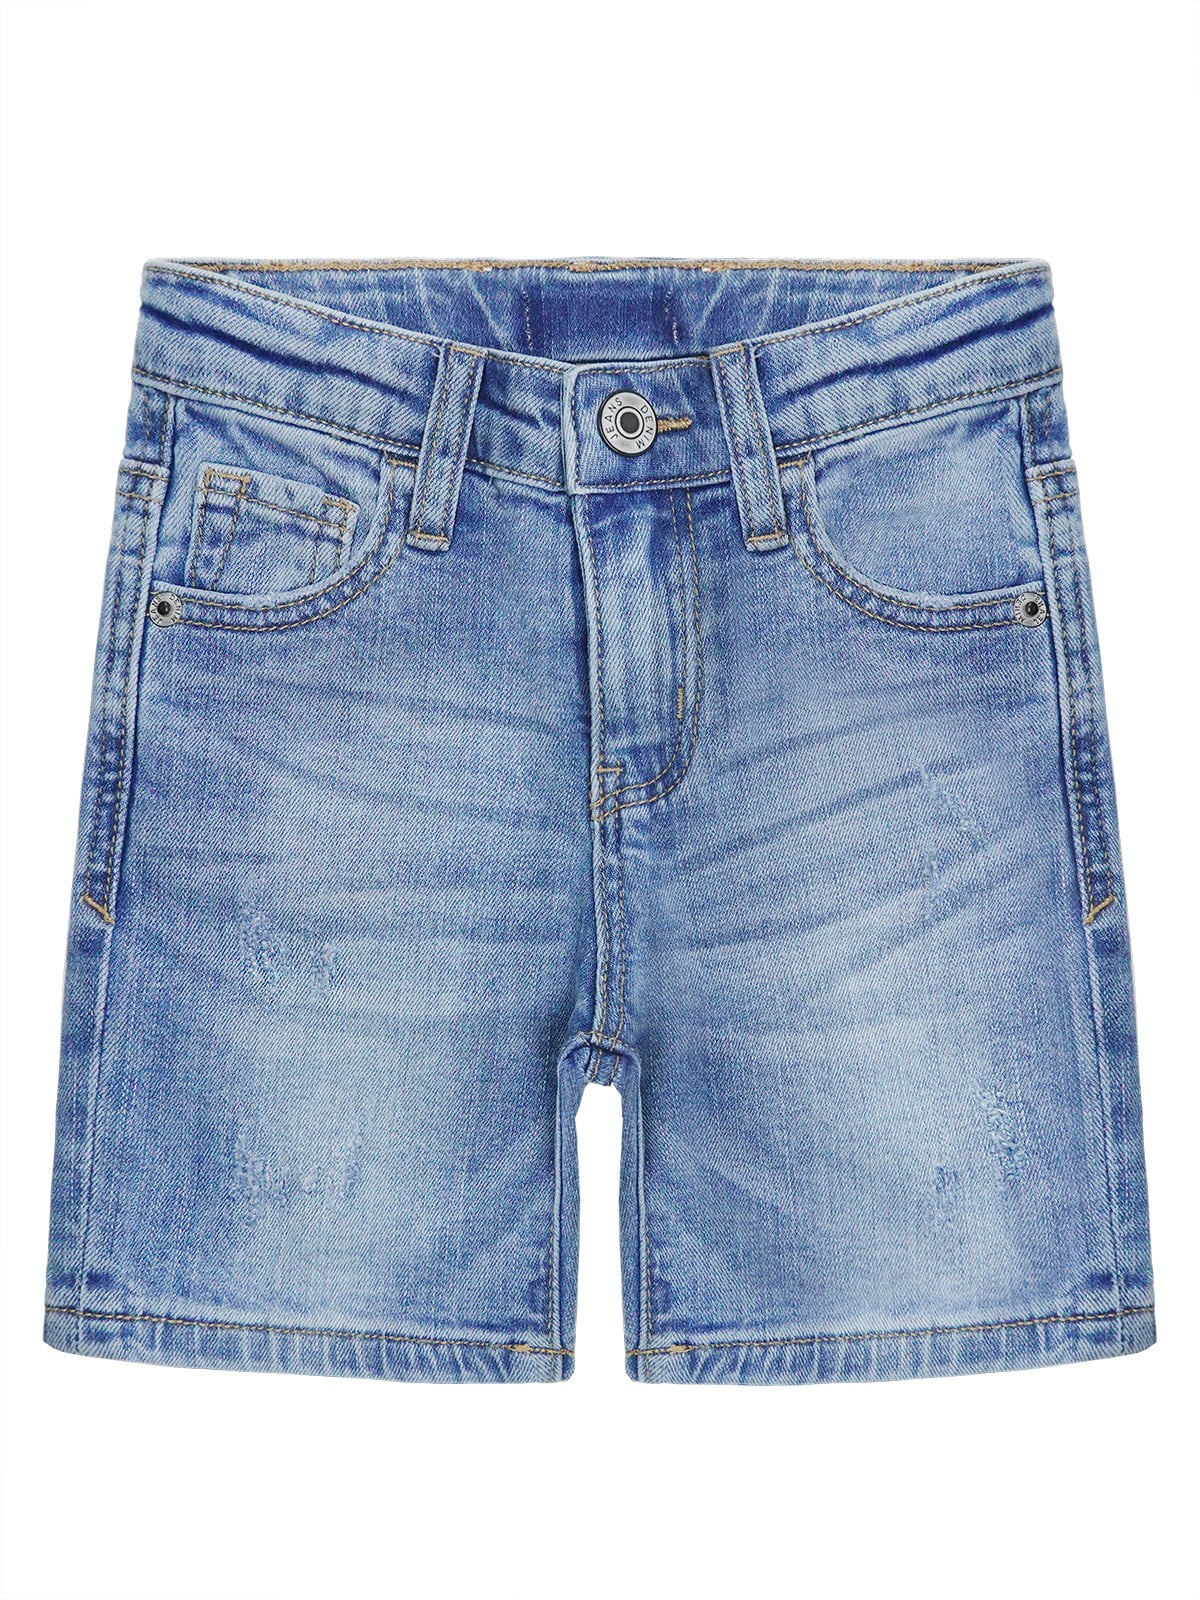 KIDSCOOL SPACE Baby Girls Boys Jeans Shorts,Ripped Simple Design Cute ...